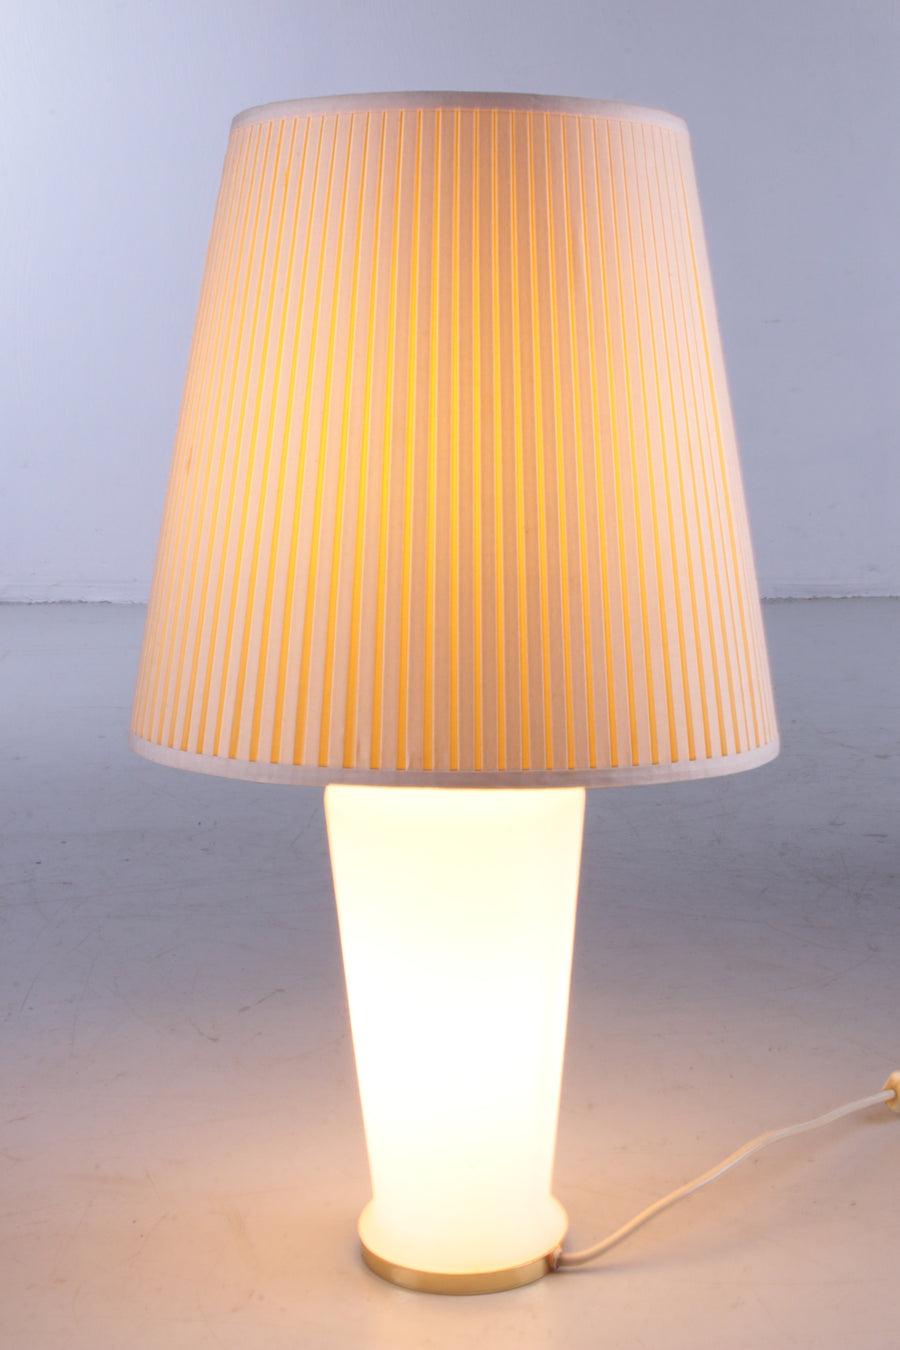 White Glass Table Lamp With a Pliche Fabric Shade, 70s

Additional information:
Dimensions: 35 W x 35 D x 63 H cm
Period of Time: 1970
Country of origin: Germany
Condition: Good